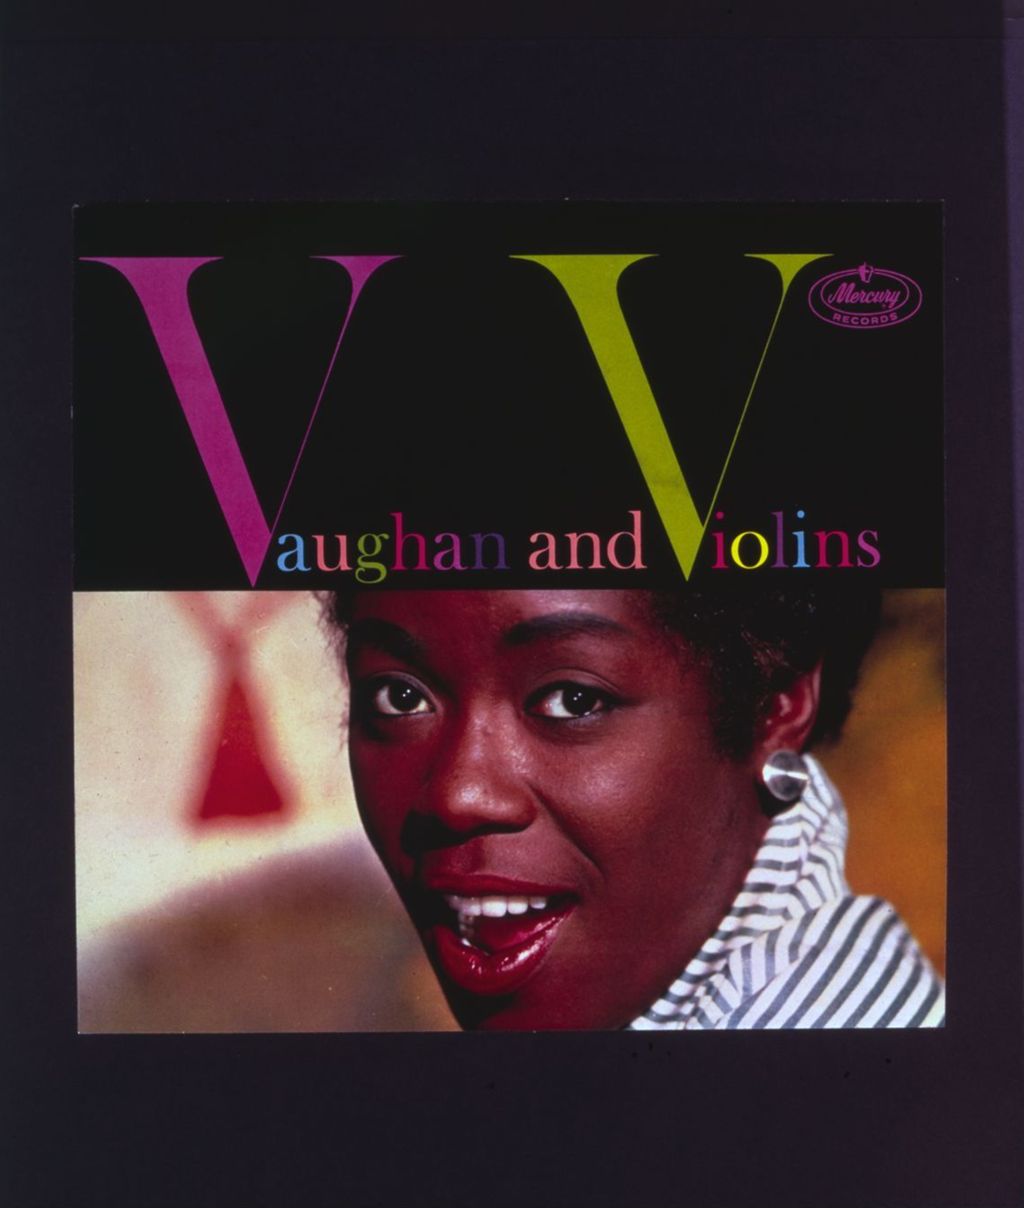 Vaughan and Violins, album cover